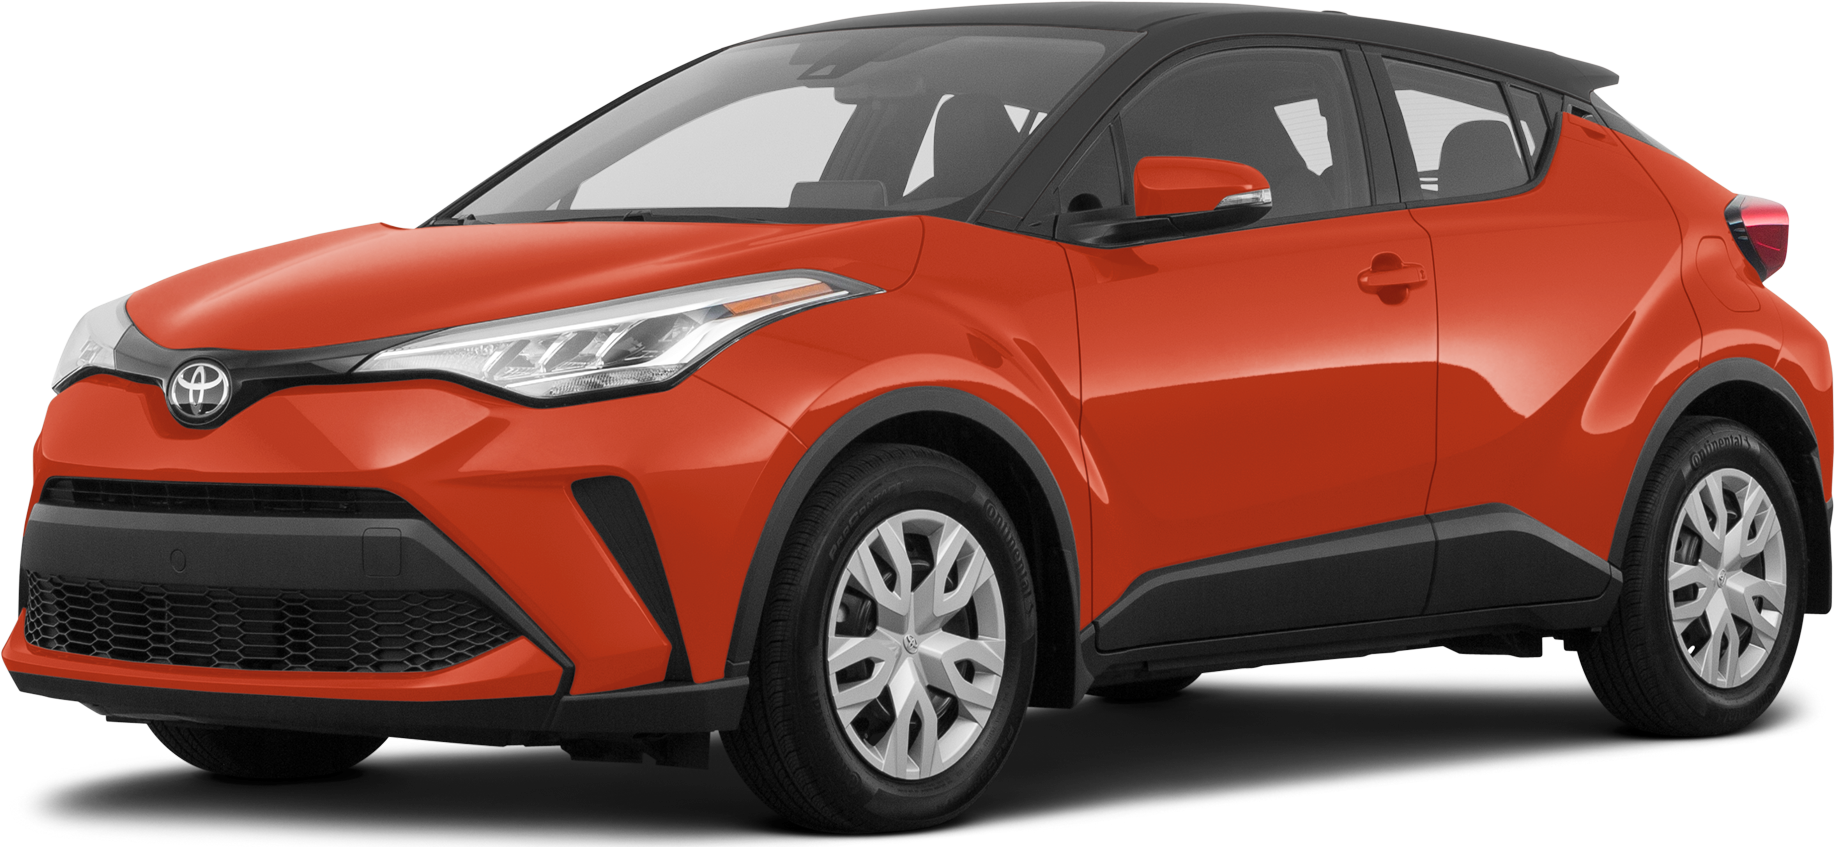 https://file.kelleybluebookimages.com/kbb/base/evox/CP/14333/2020-Toyota-C-HR-front_14333_032_1835x847_2TC_cropped.png